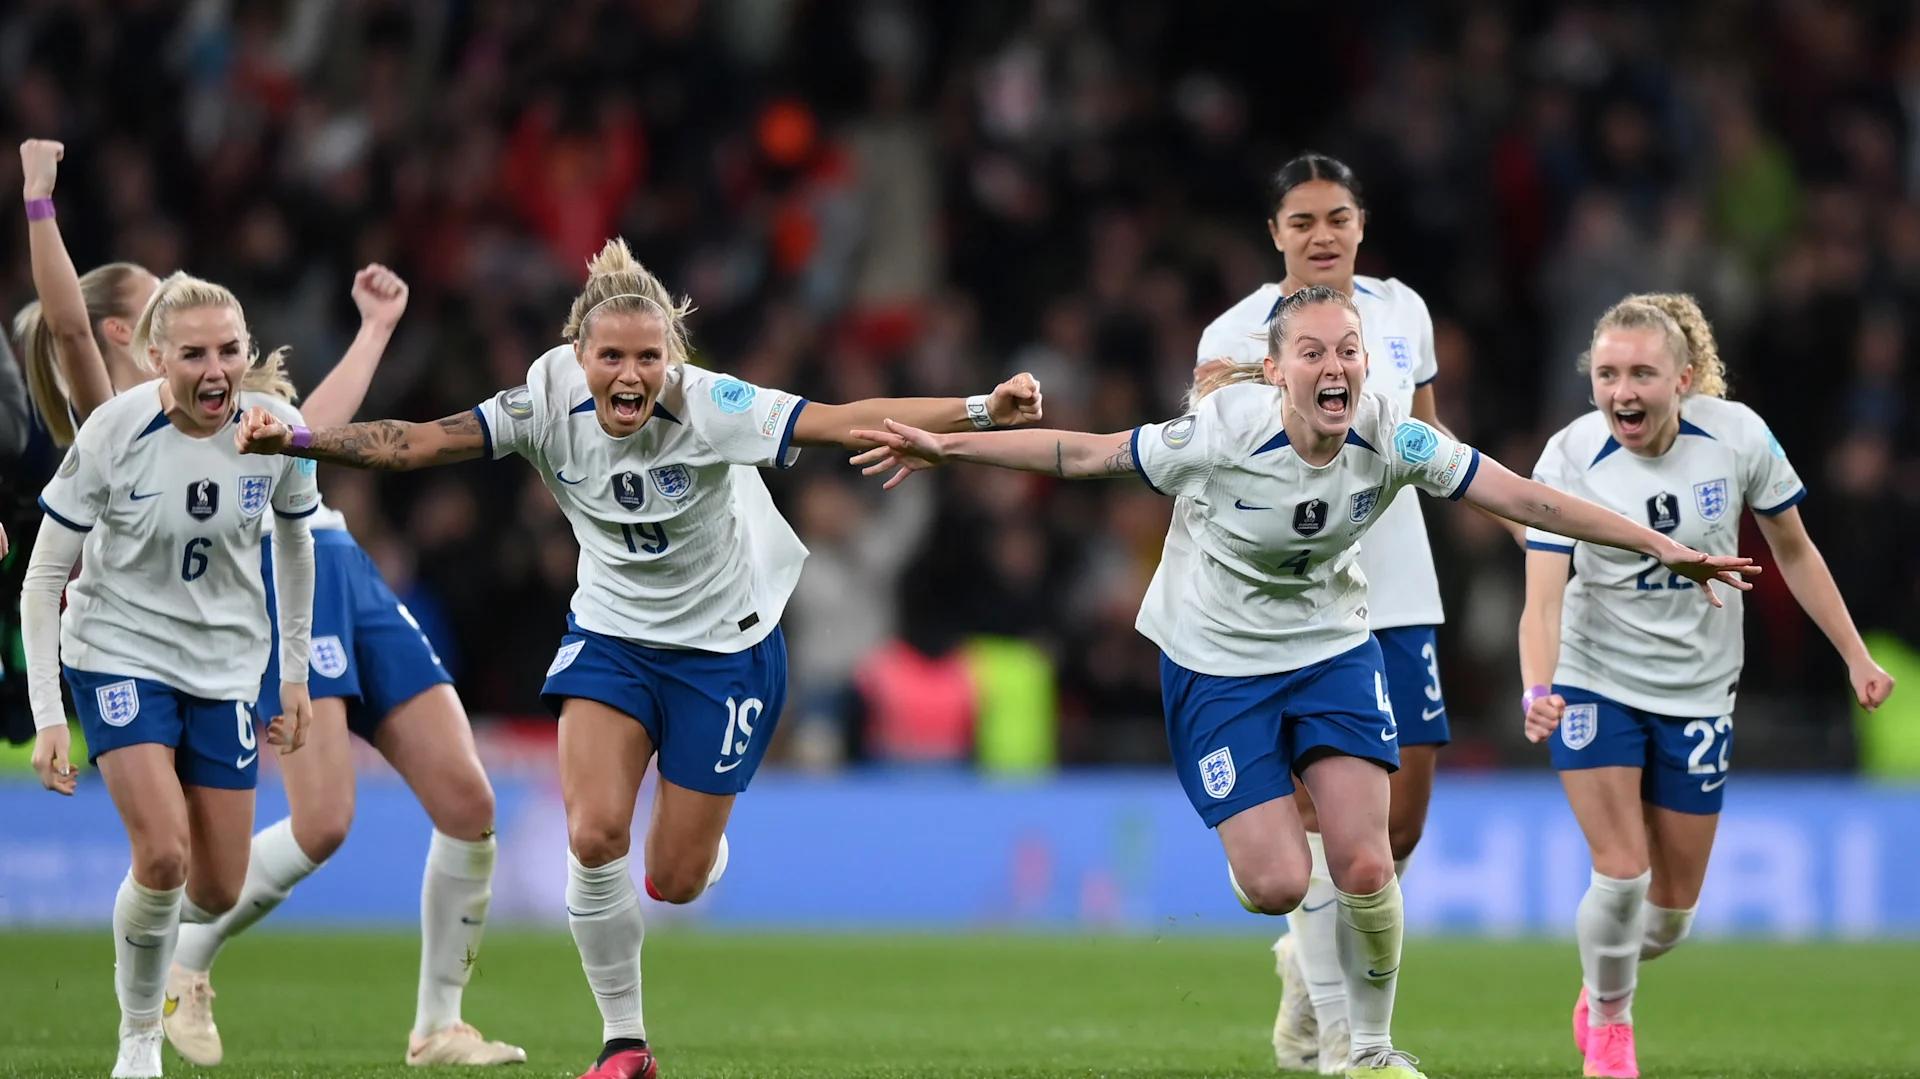 Image of England Women's football team celebrating after scoring a goal for England